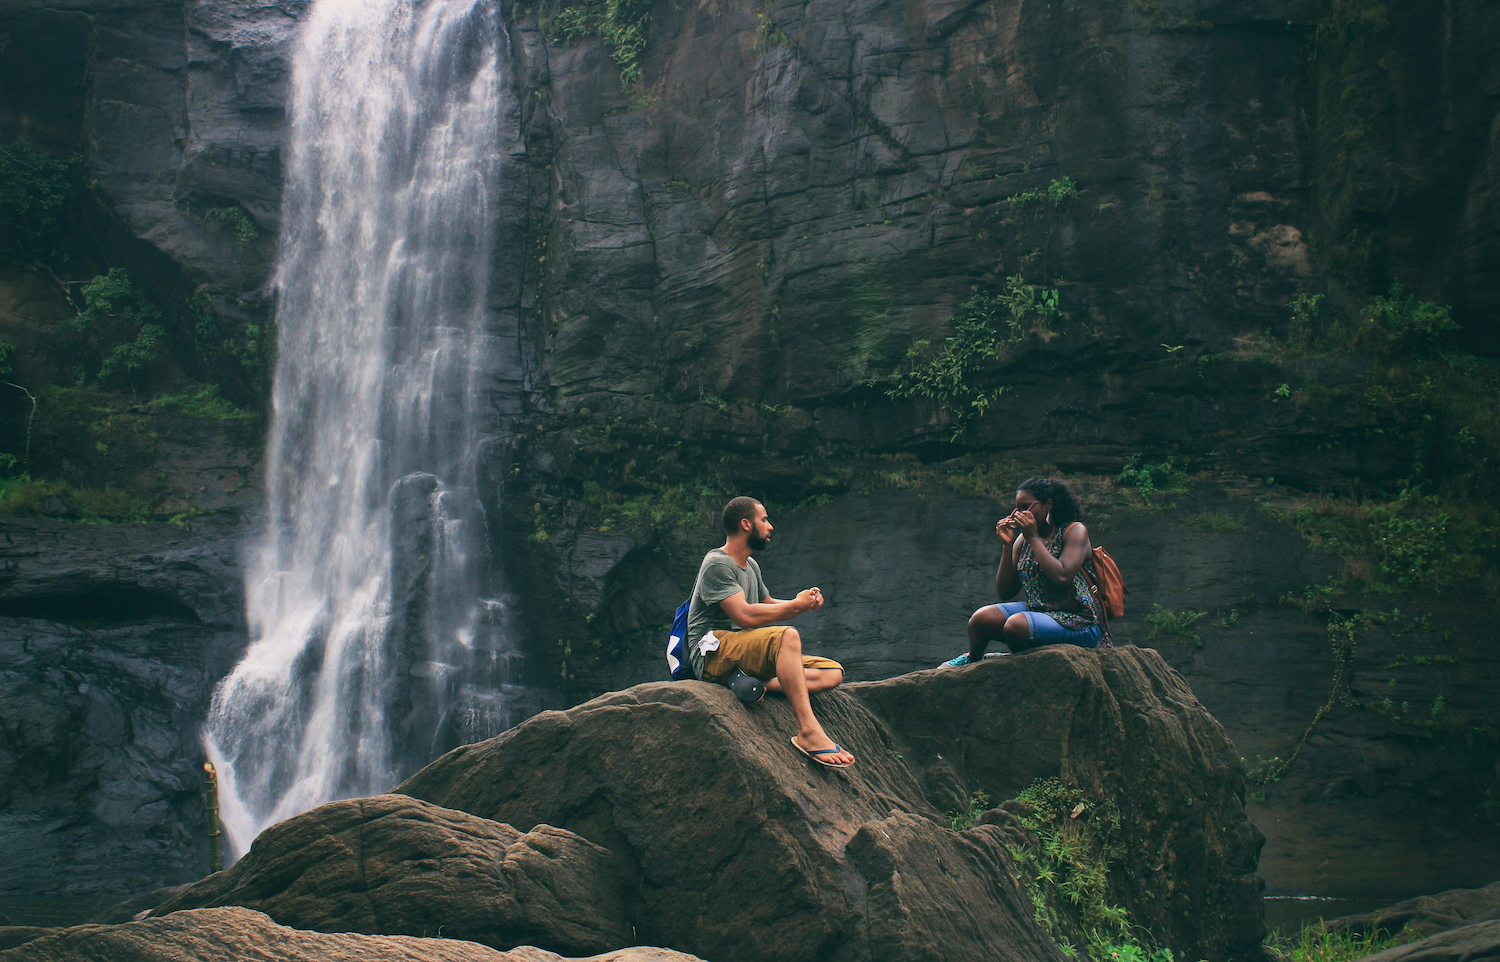 Couple at Waterfall - How to Plan a Trip